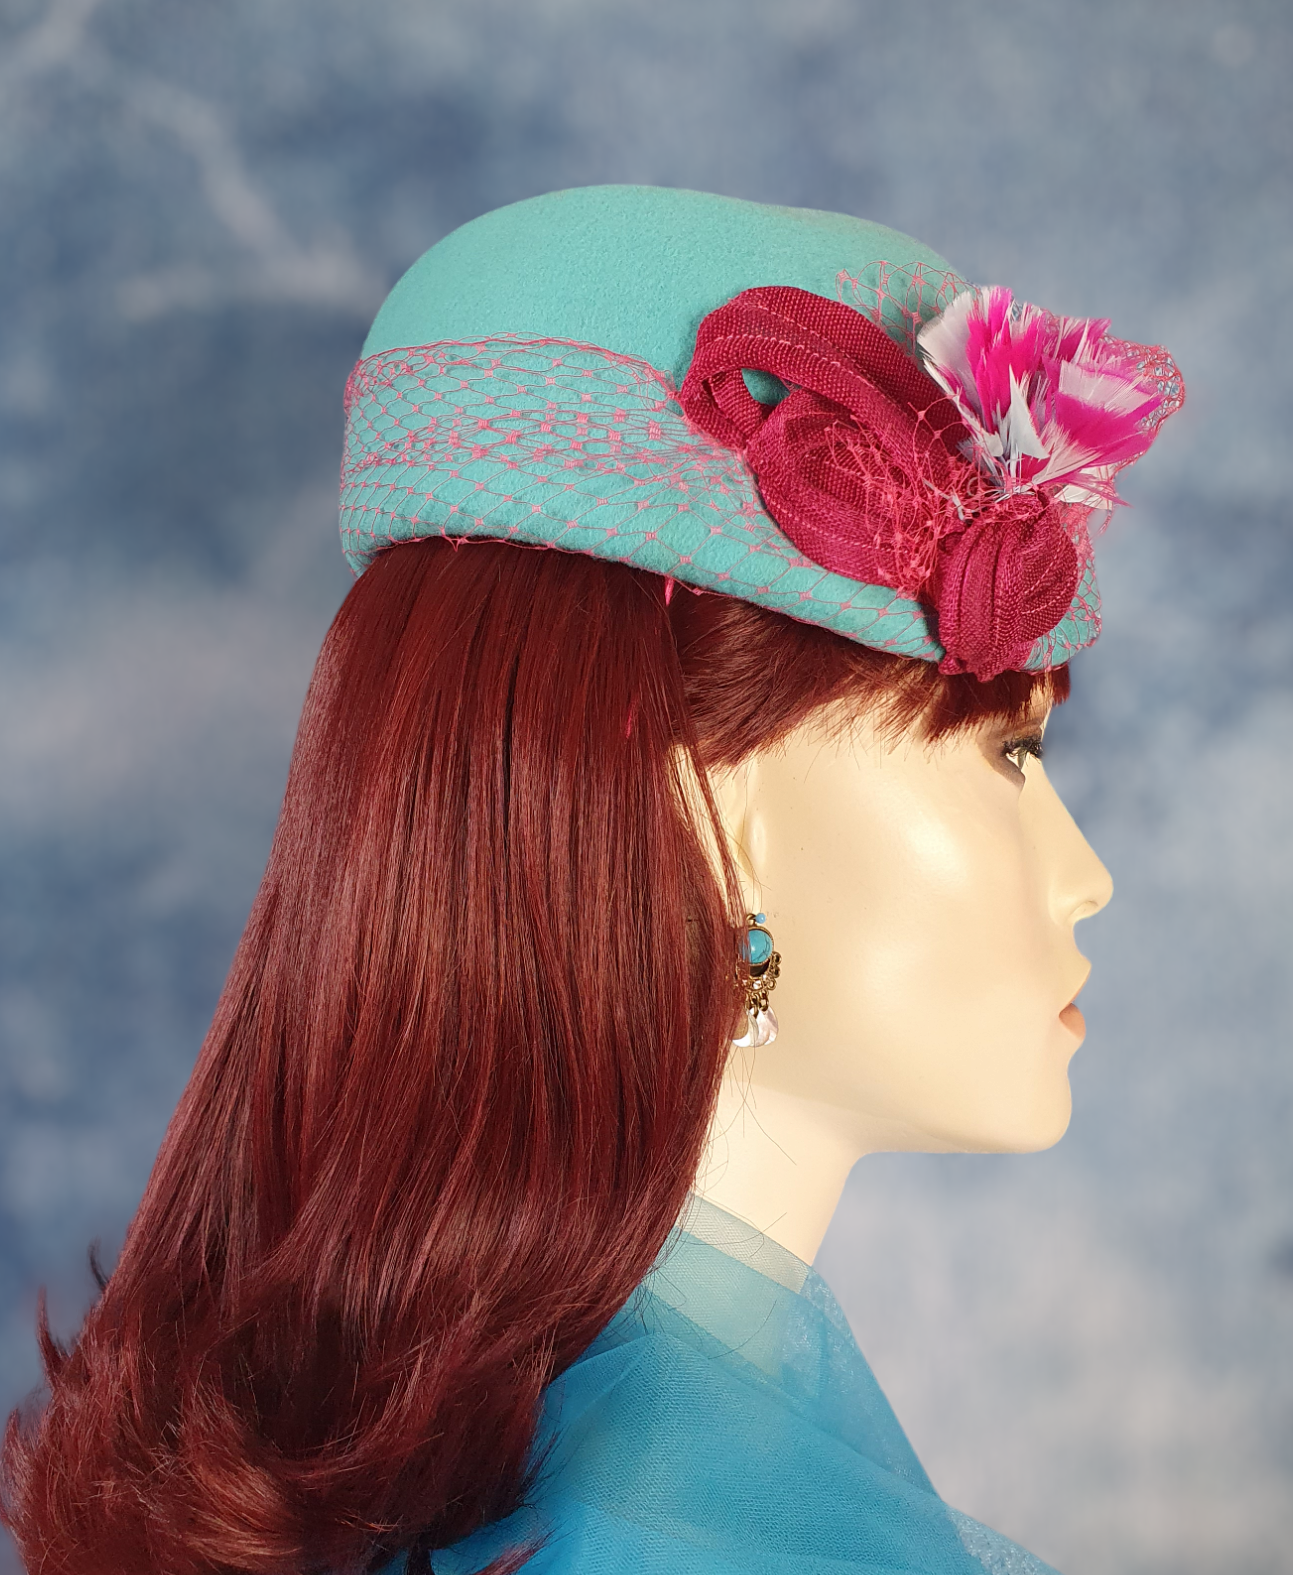 Handmade blue felt fascinator with pheasant feathers and abaca silk, elegant vintage pillbox women's hat for special occasions.